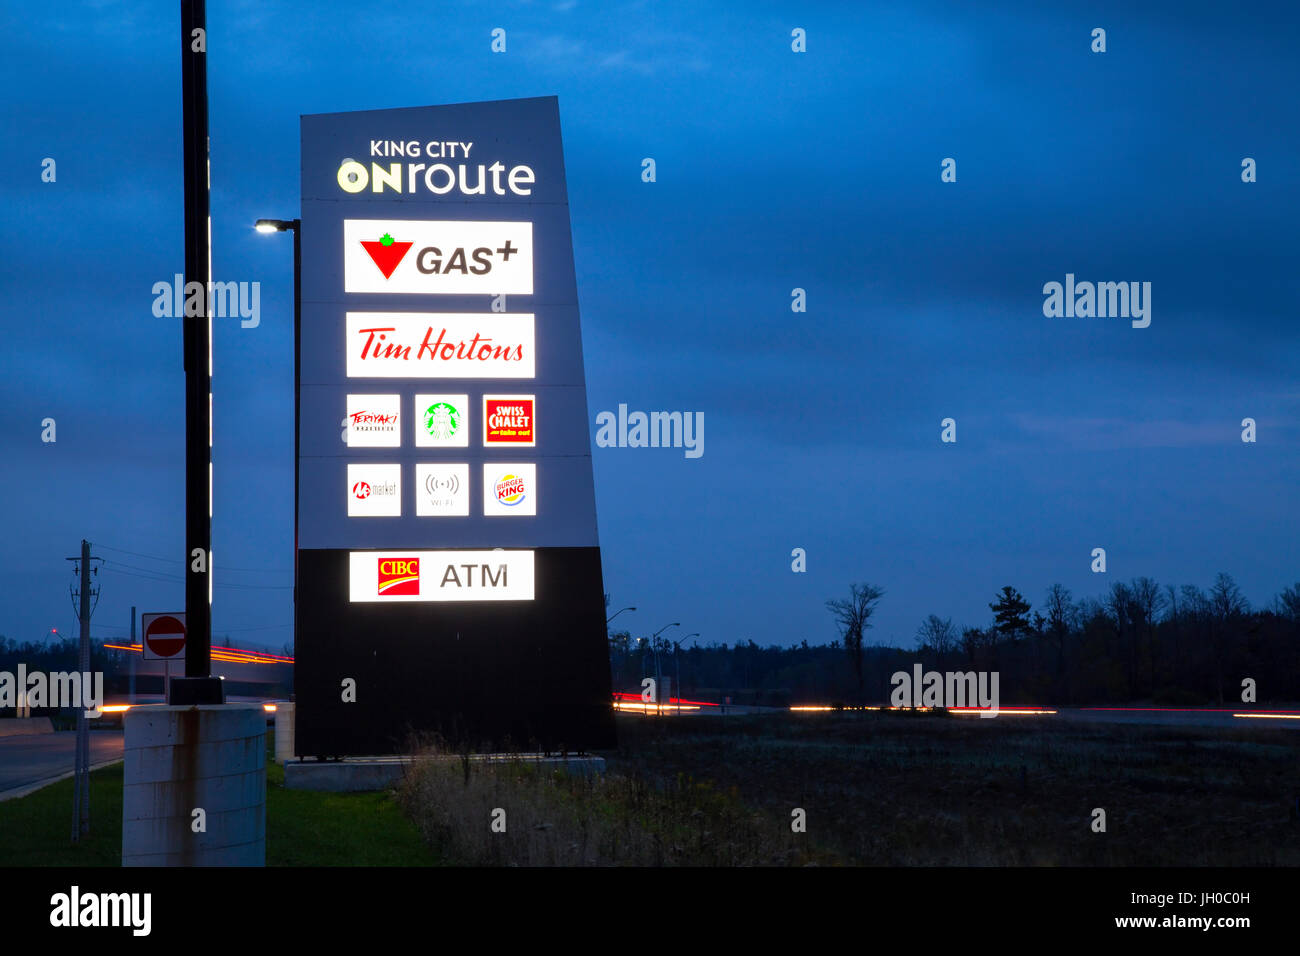 The sign for the King City ONroute service centre or travel plaza owned by Host Kilmer Service Centres HKSC in King City, York Region, Ontario, Canada Stock Photo